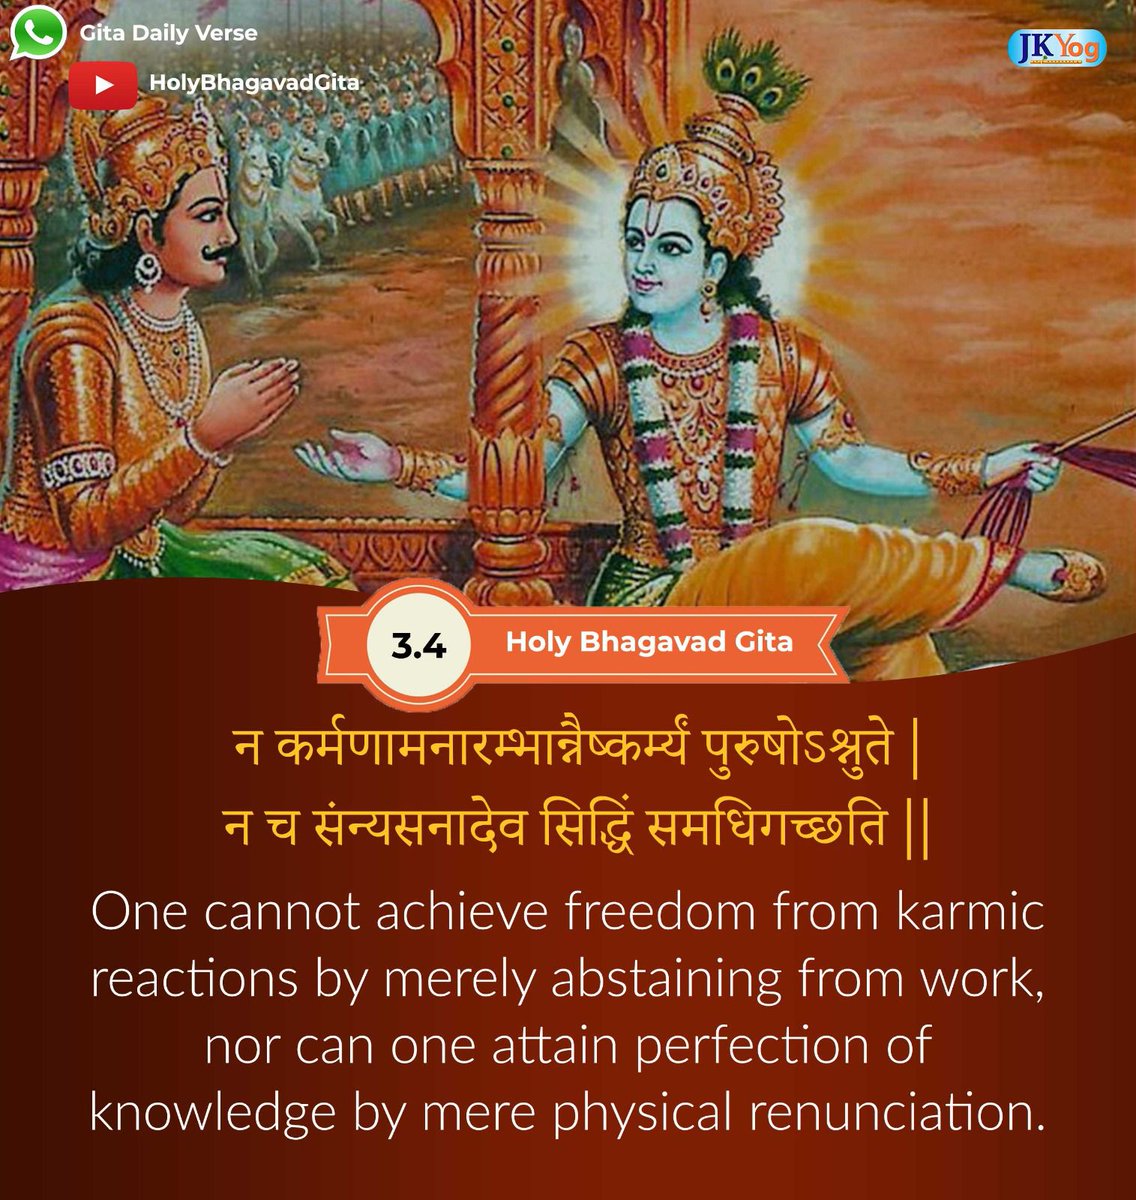 'Shree Krishna says that mere abstinence from work does not result in a state of freedom from karmic reactions. The mind continues to engage in fruitive thoughts, and since mental work is also a form of karma, it binds one in karmic reactions, just as physical work does.'